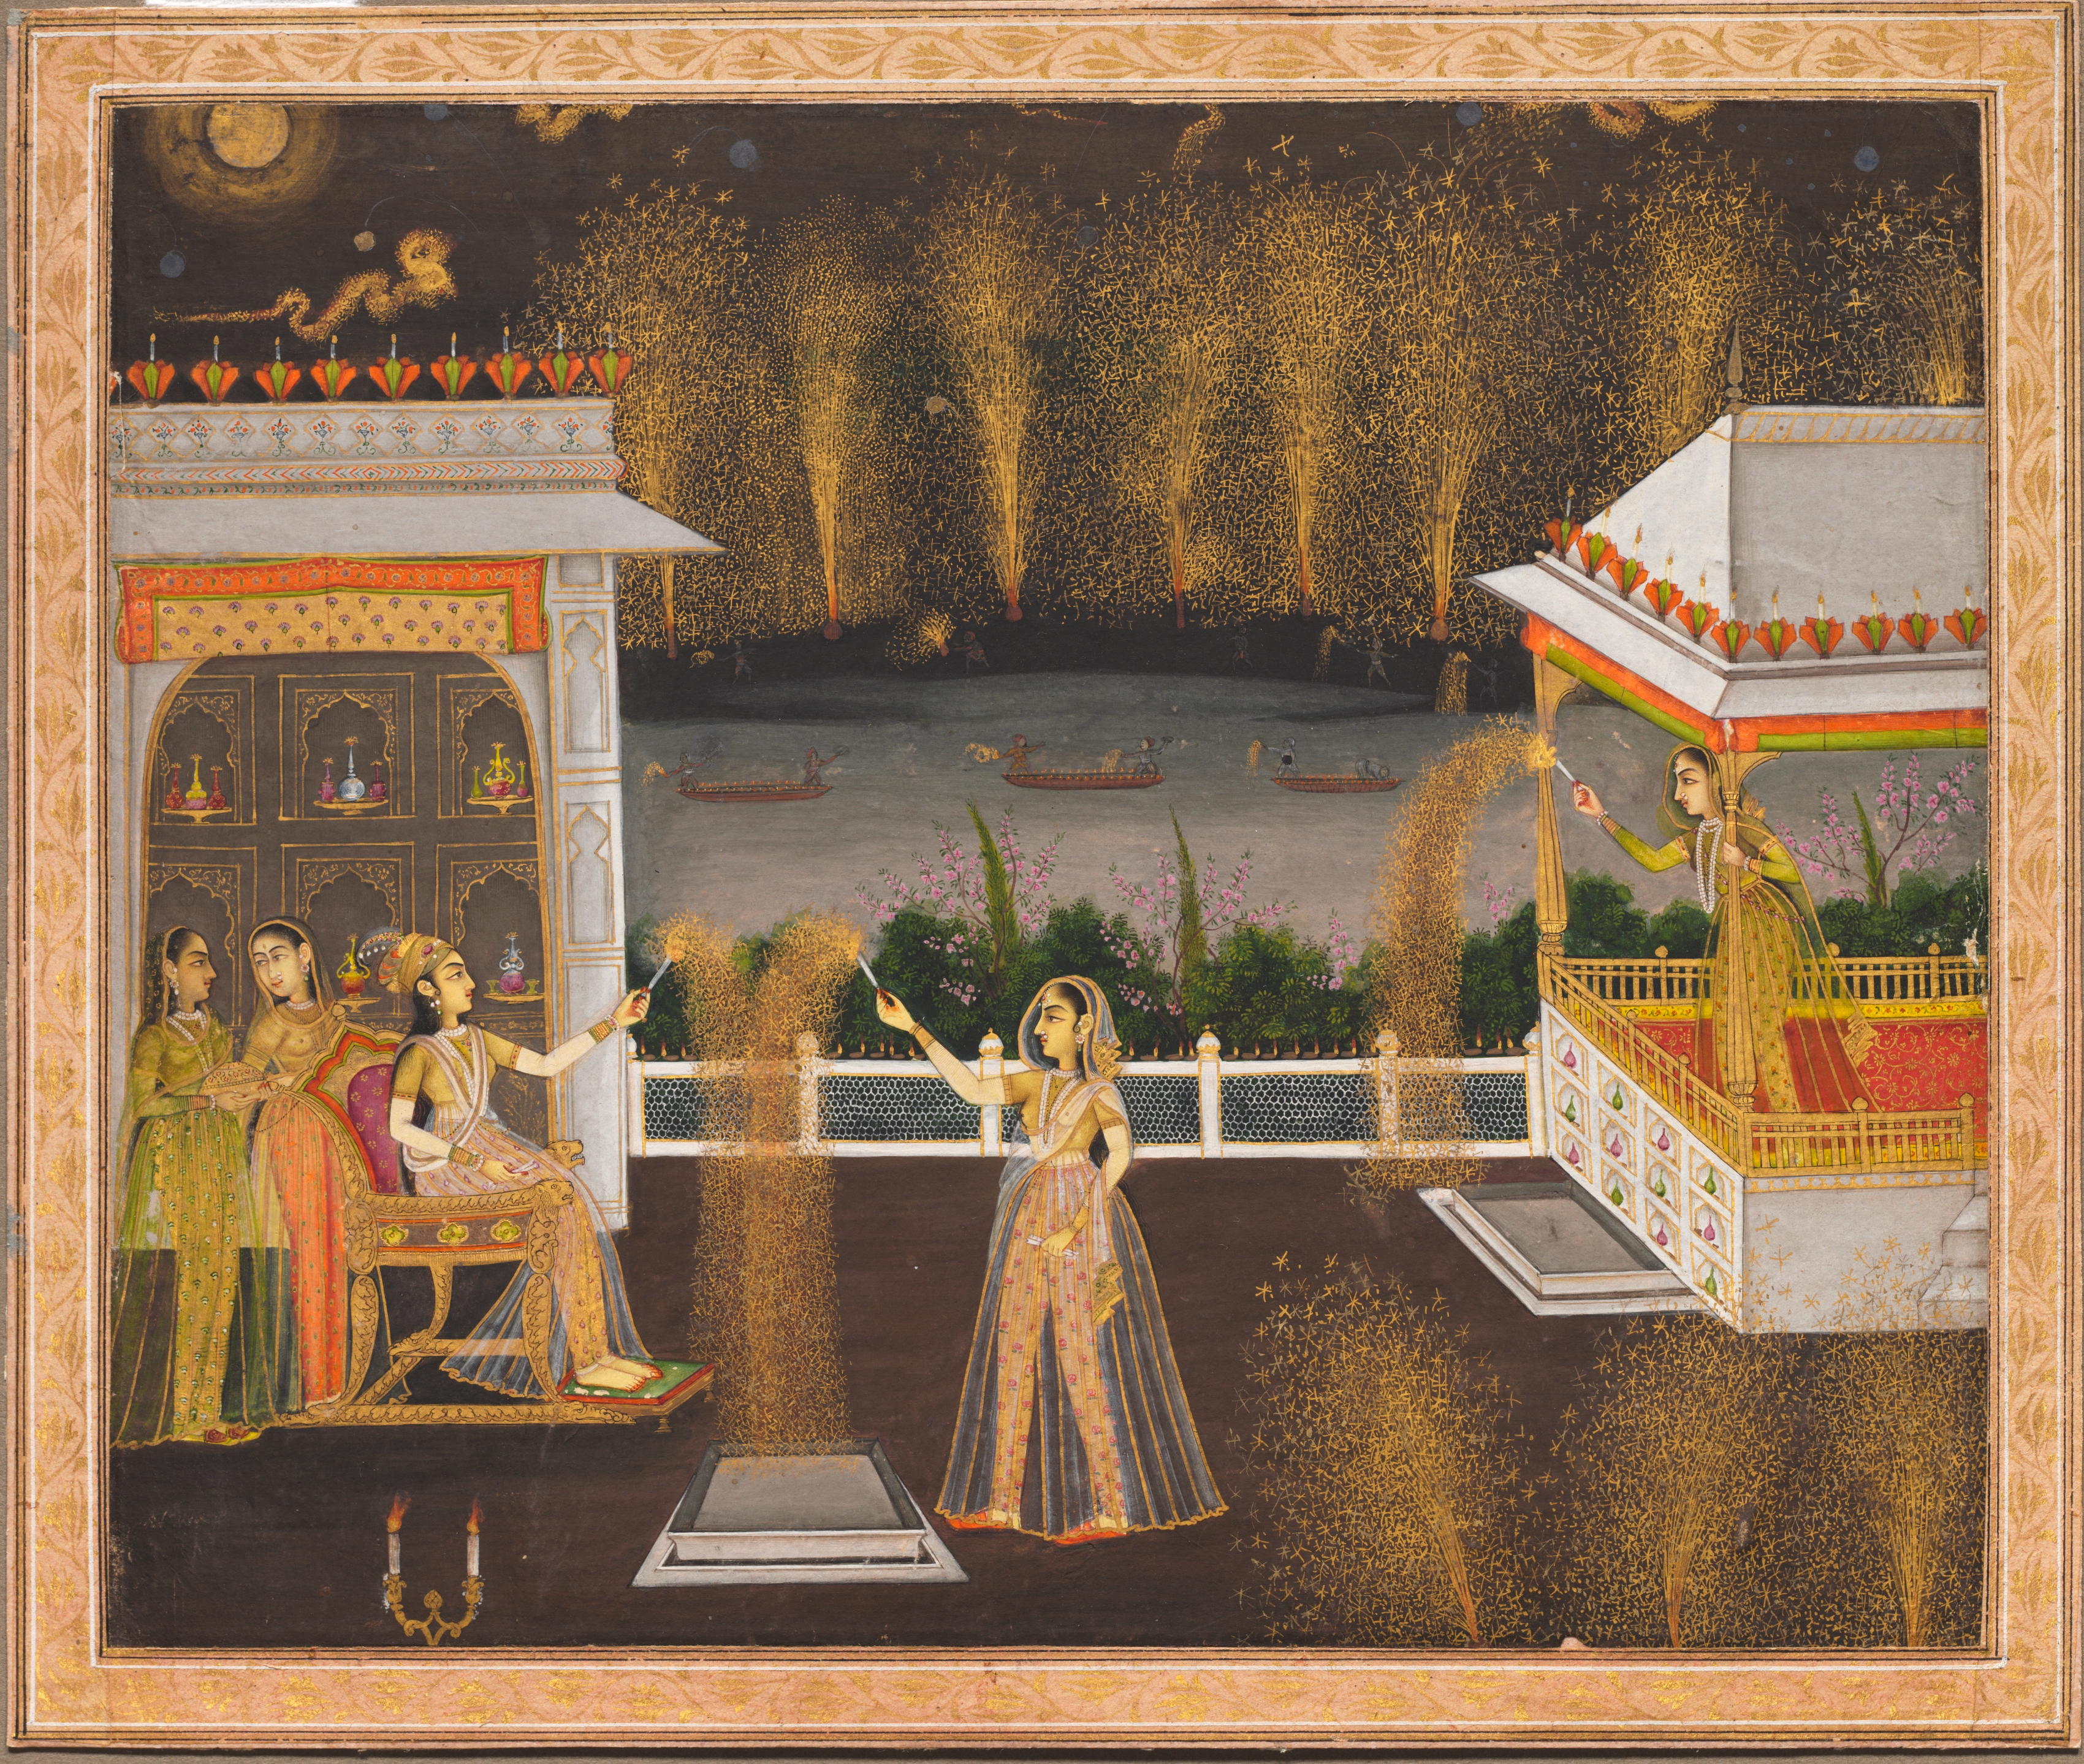 Ladies Celebrating Diwali by Unknown Artist - cr. 1760 - 20.5 x 24.7 cm Cleveland Museum of Art